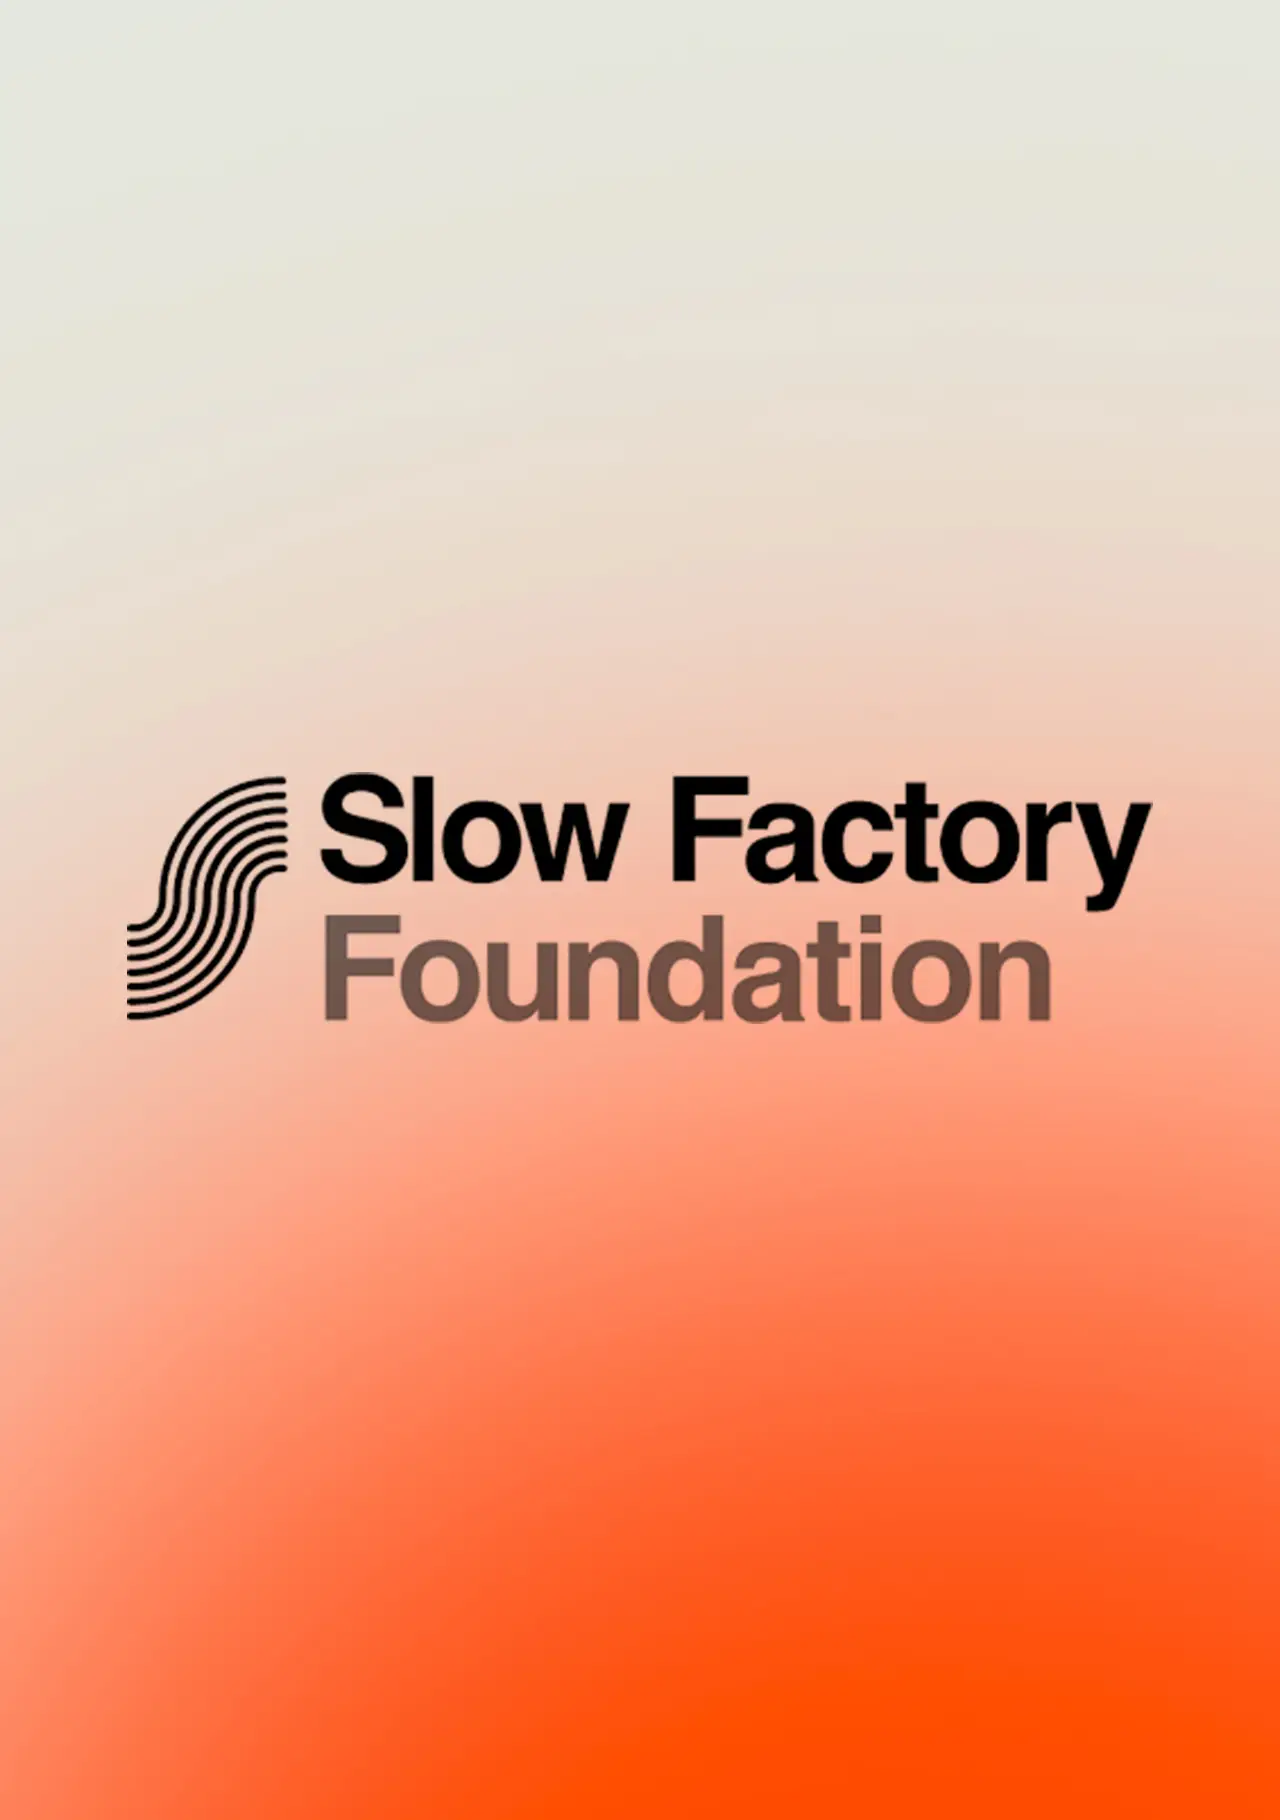 Slow-factory